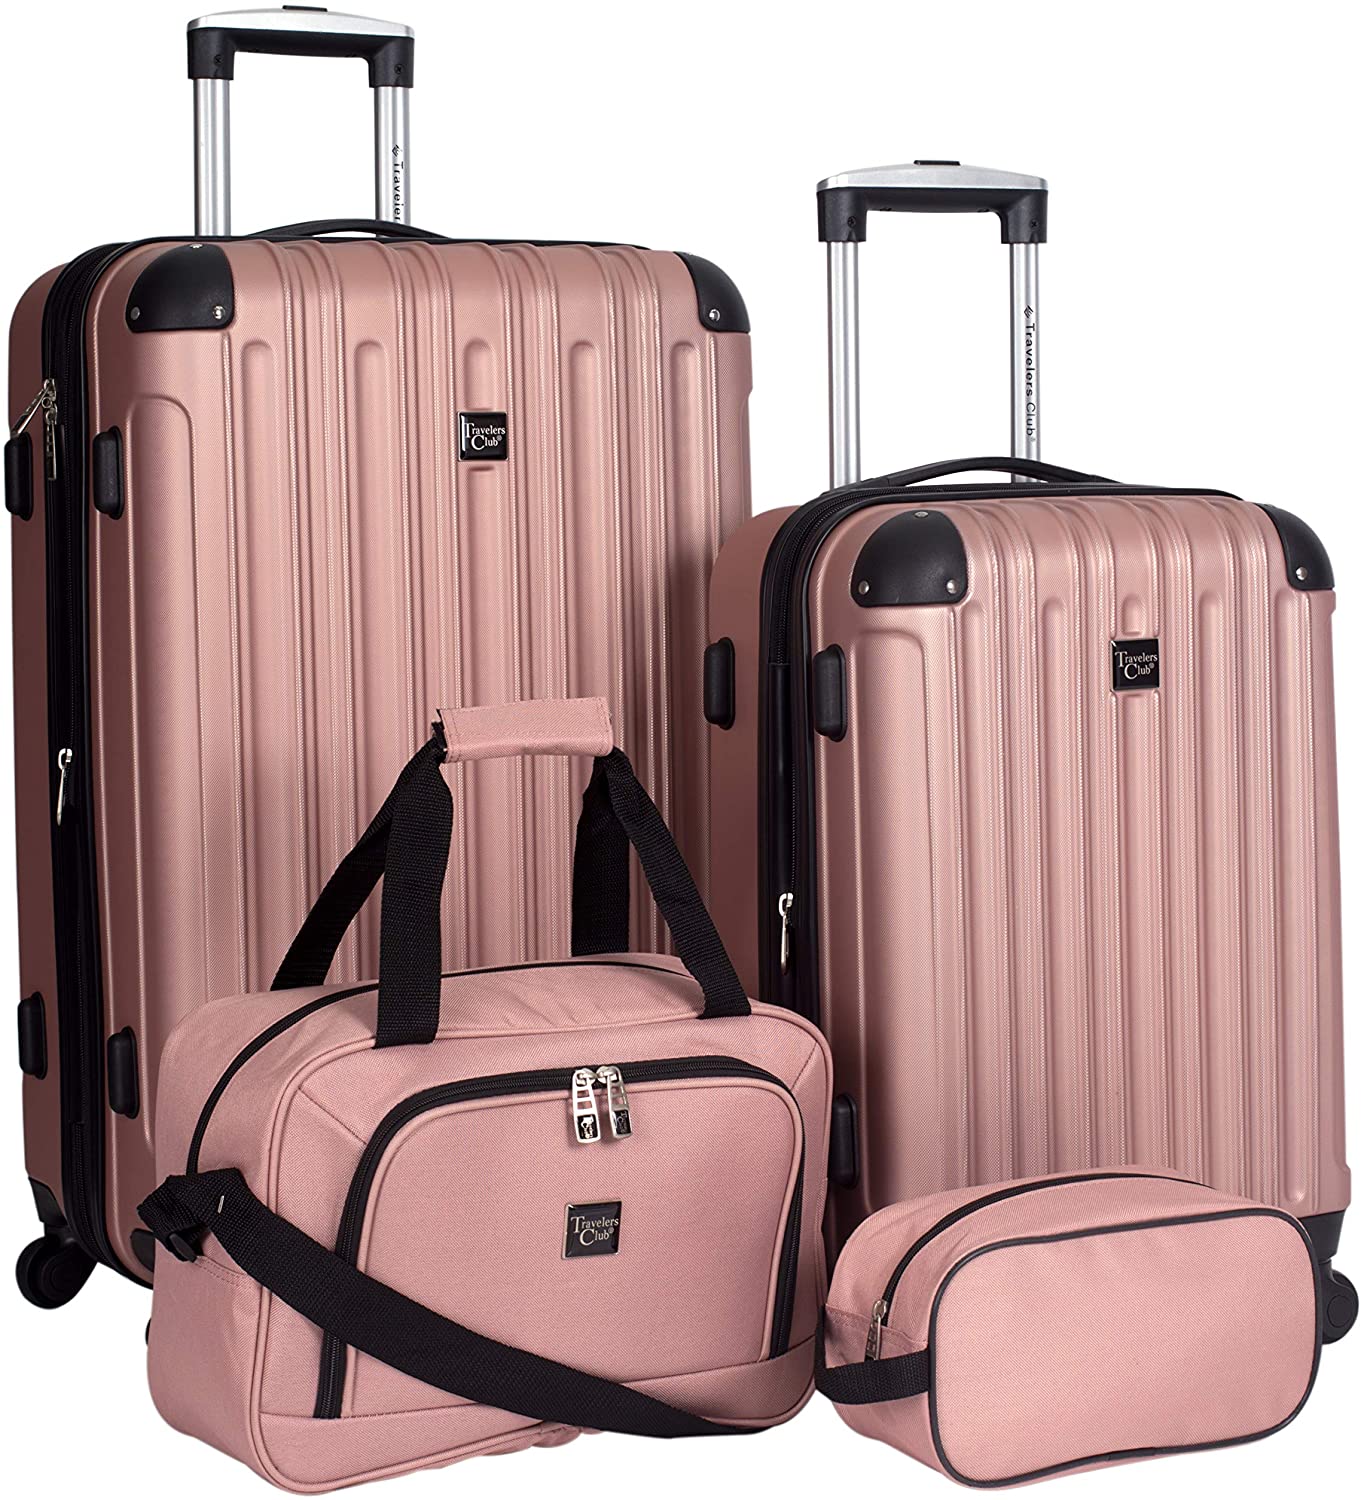 Travelers Club Midtown Fully-Lined Hard Shell Suitcase, 4-Piece